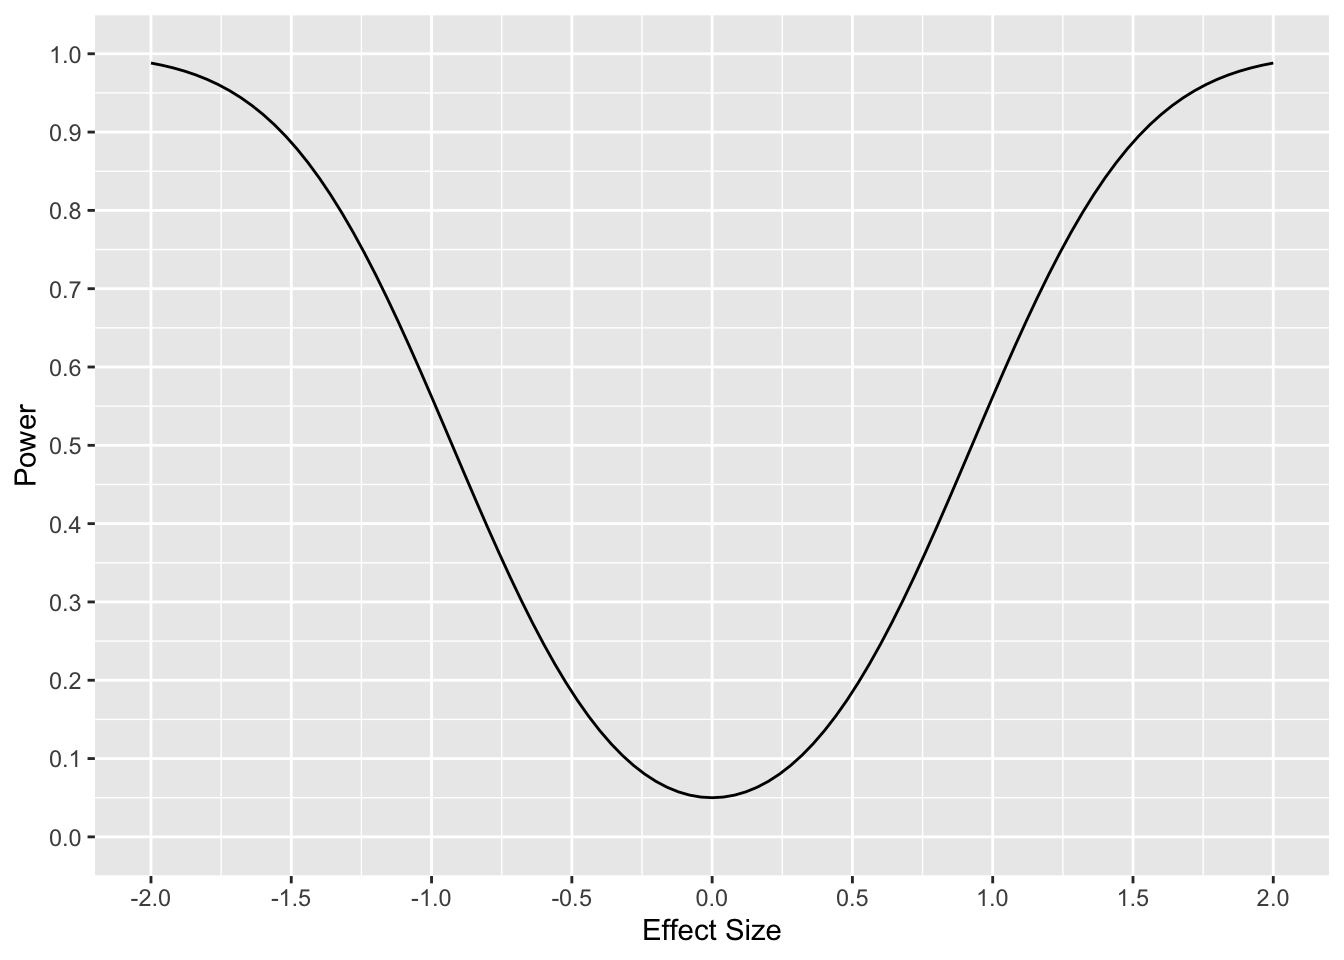 Two-Sample t-test Power and Effect Size, N = 10